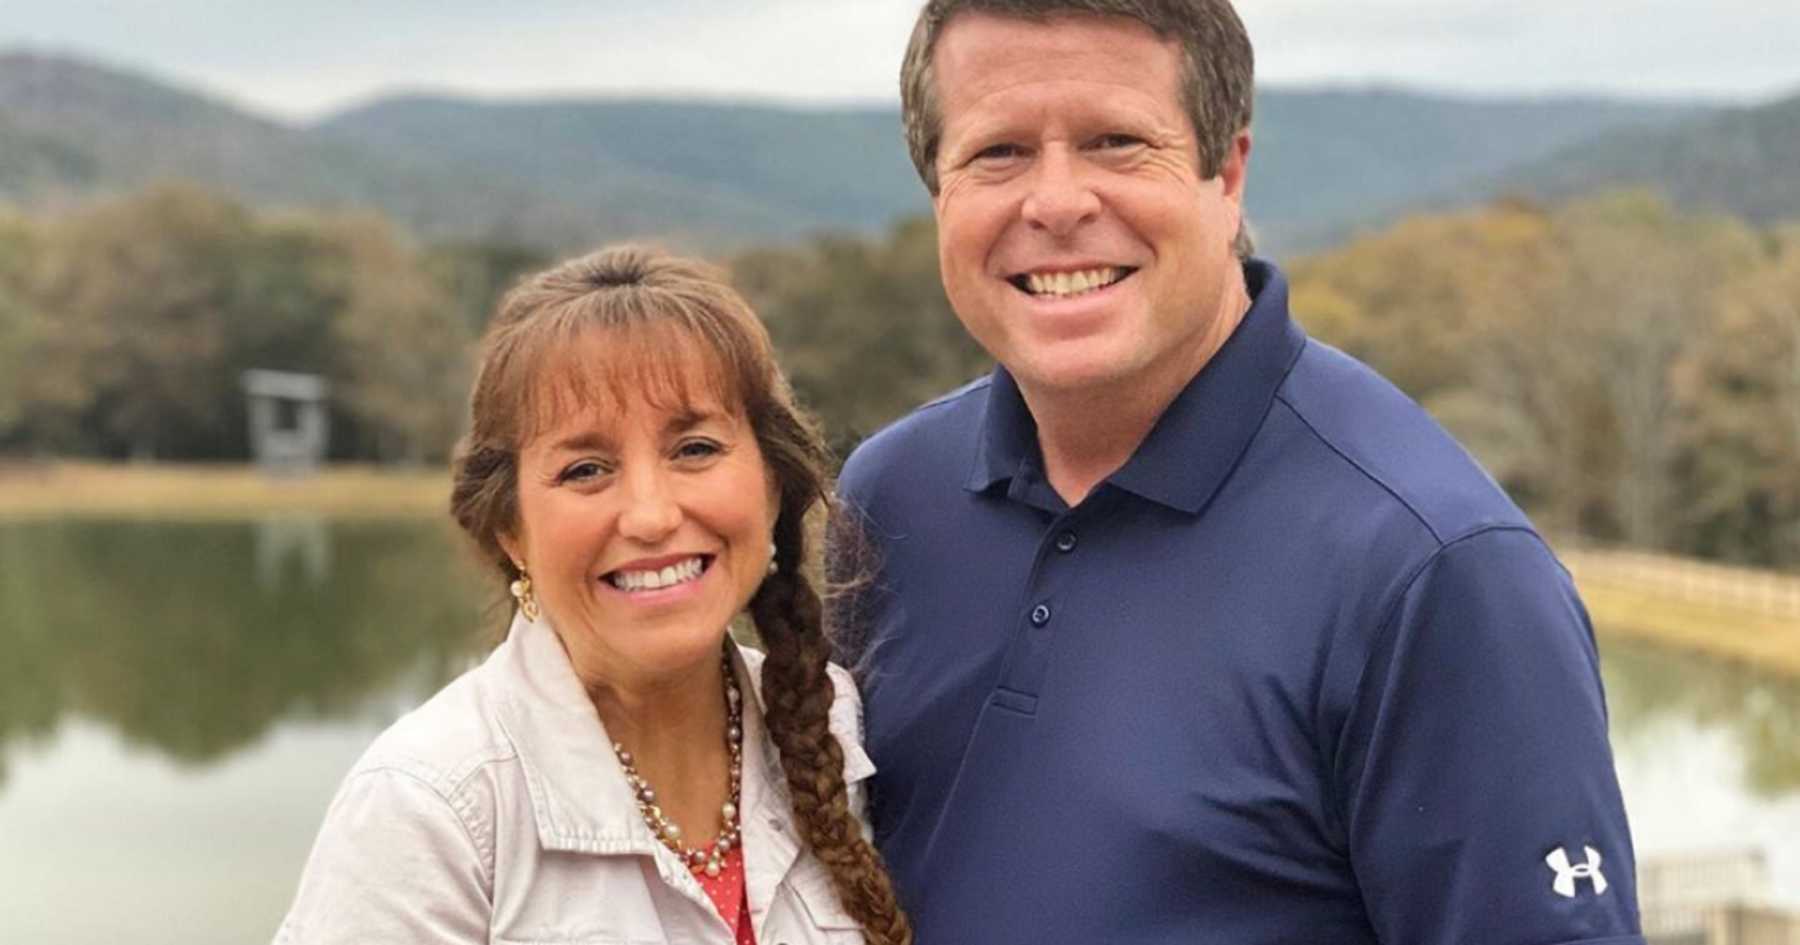 Report: Josh Duggar's Co-Detainees on a Leaked Tape Complaining About His Arrival